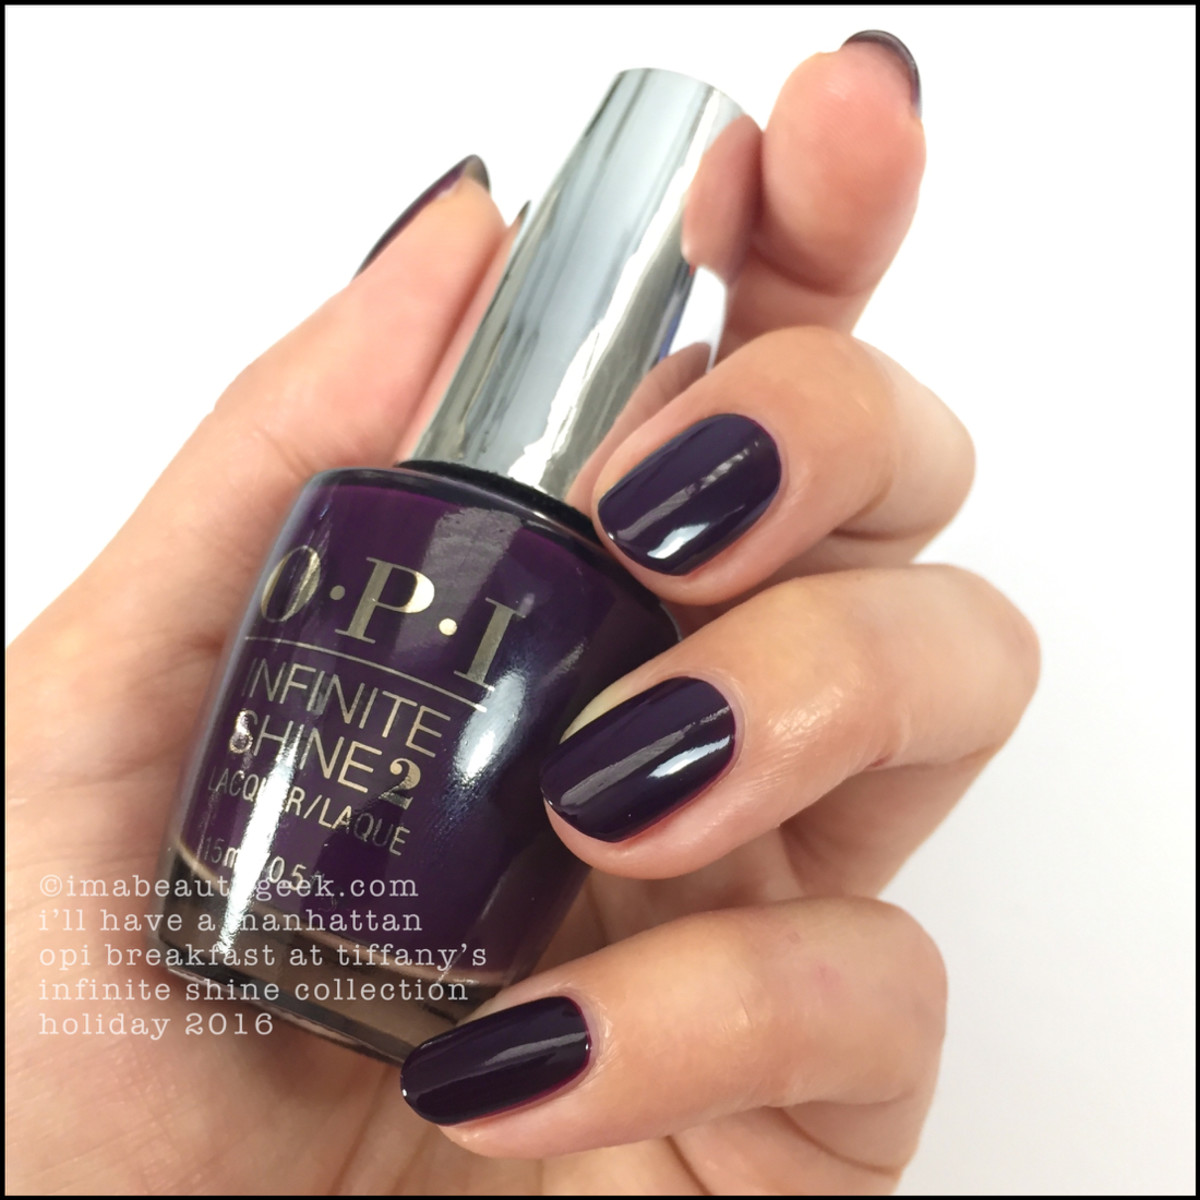 OPI Breakfast at Tiffanys_OPI Ill Have a Manhattan Infinite Shine Swatches Review Holiday 2016